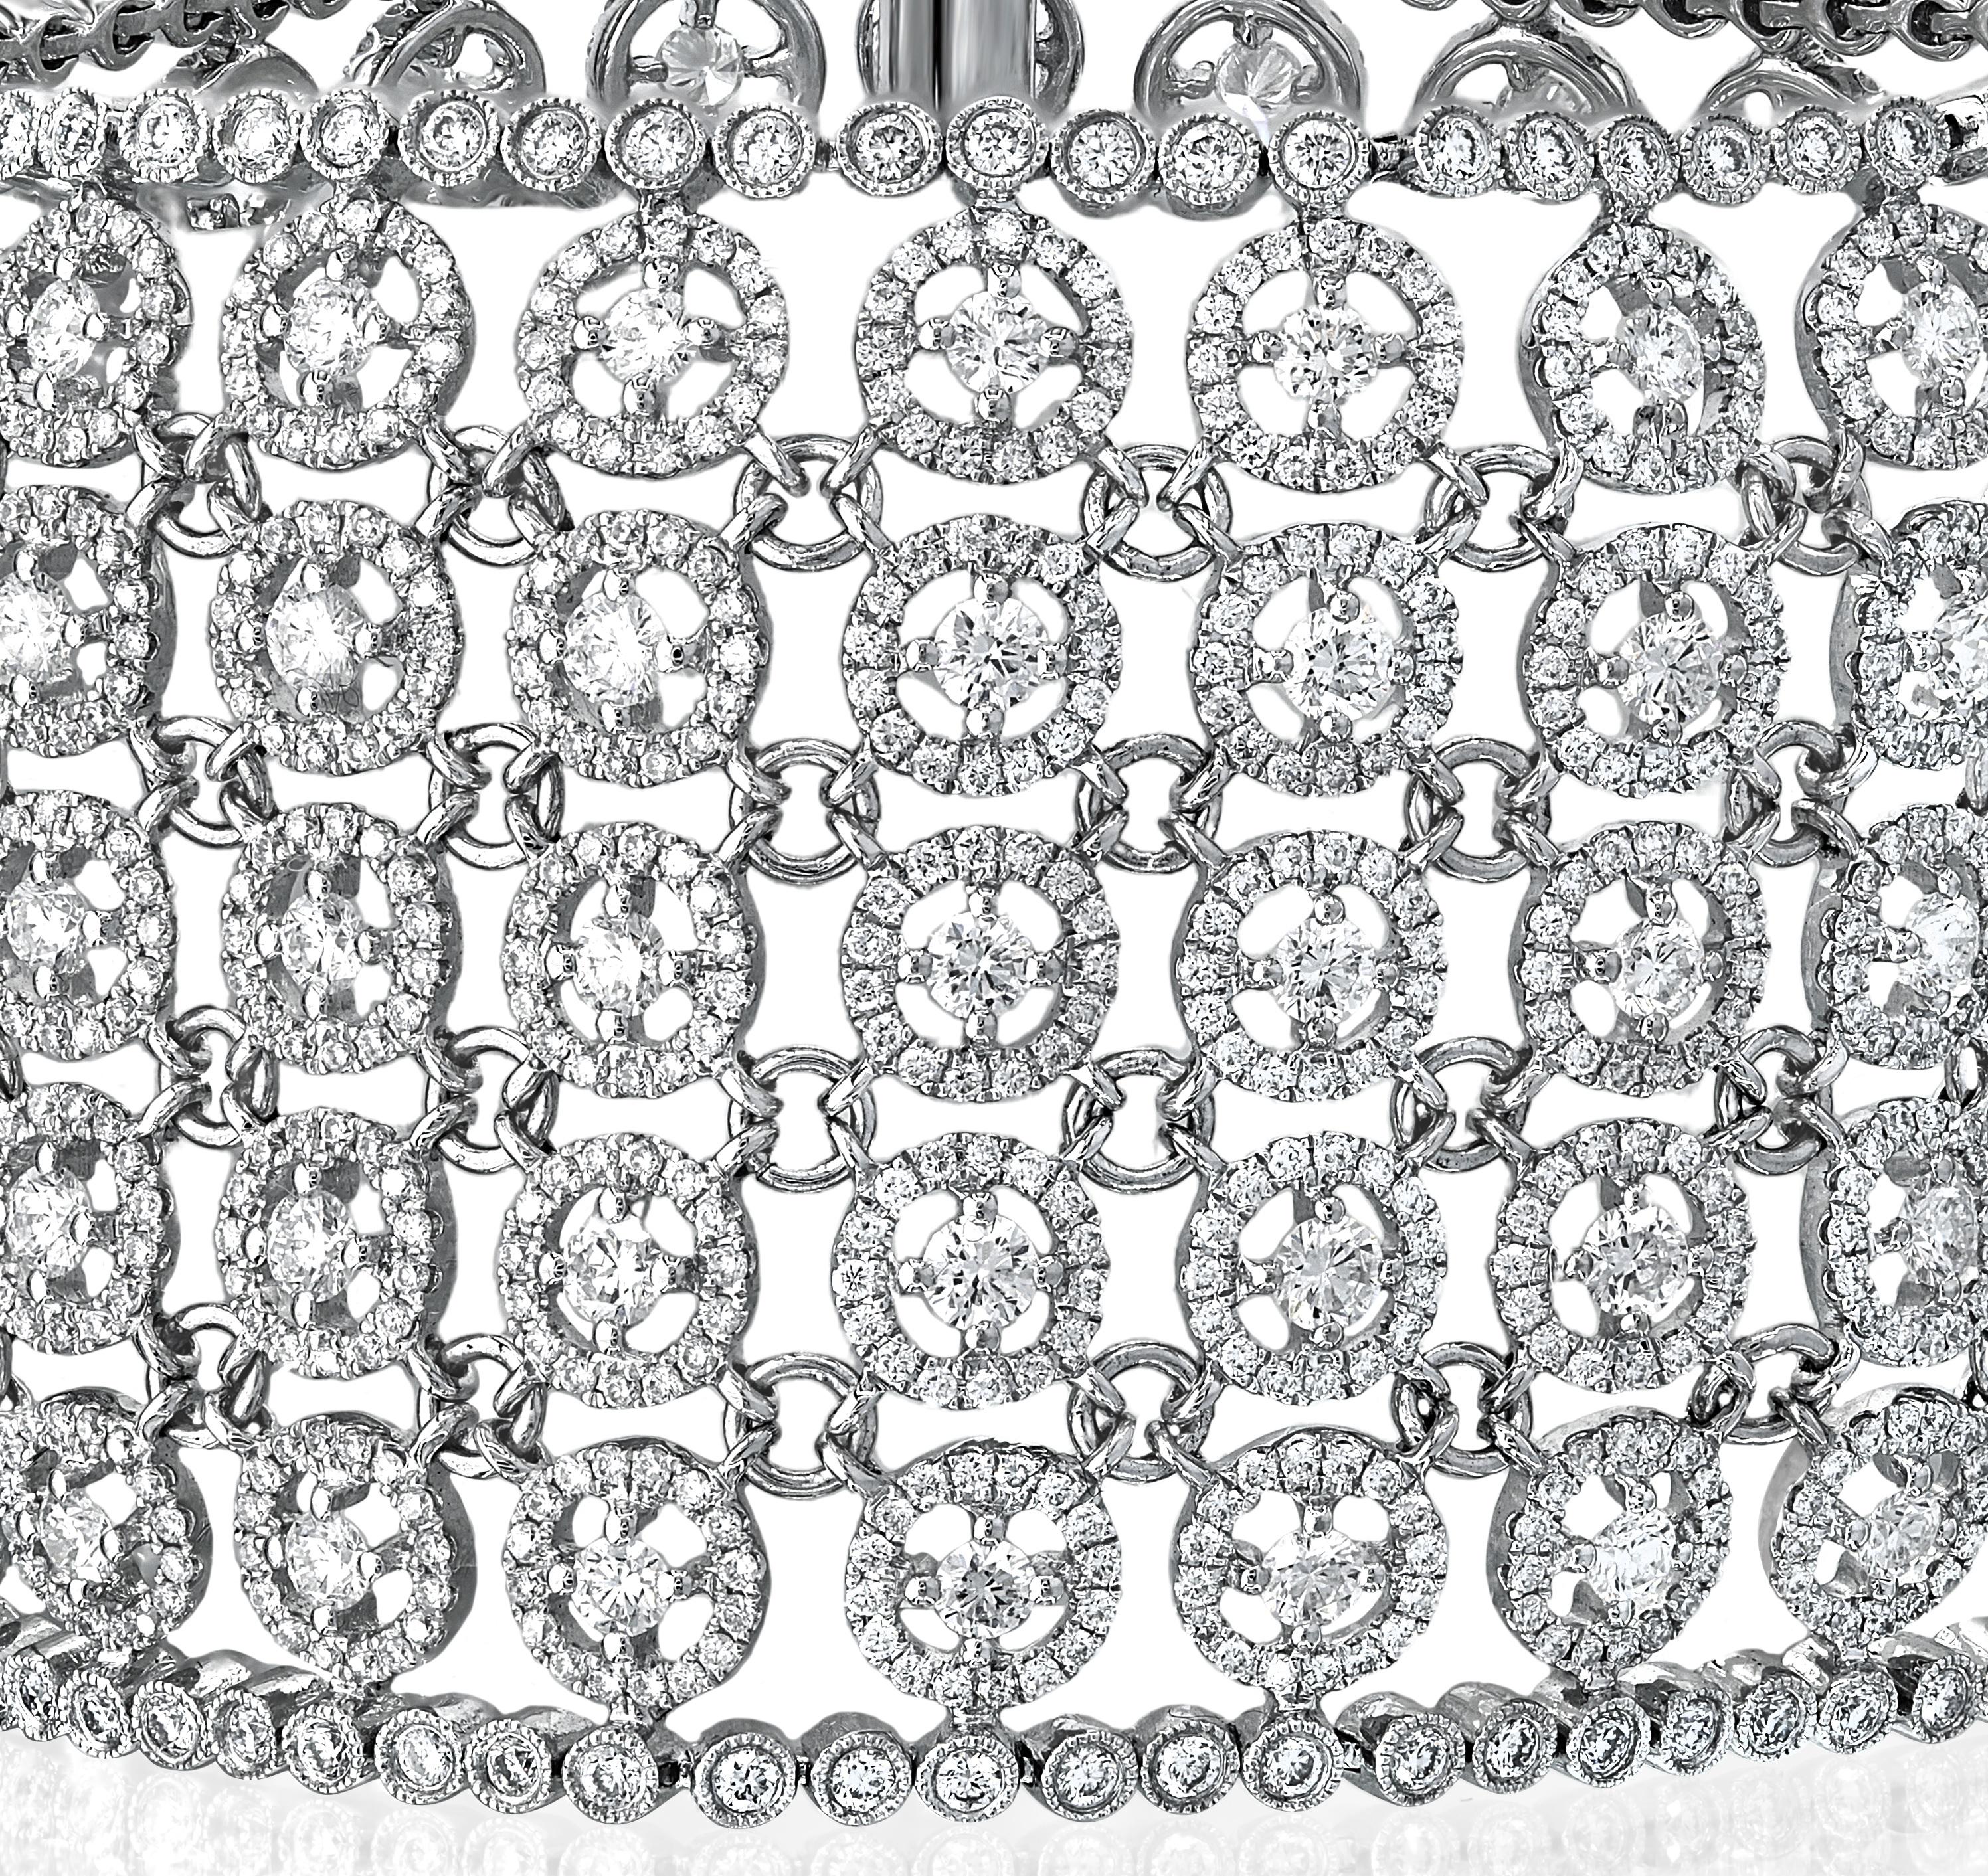 This bracelet is a masterpiece that seamlessly blends delicacy with opulence. Crafted with precision and adorned with a total of 14.12 carats of natural round diamonds, this bracelet is a true embodiment of timeless beauty.

Picture yourself adorned